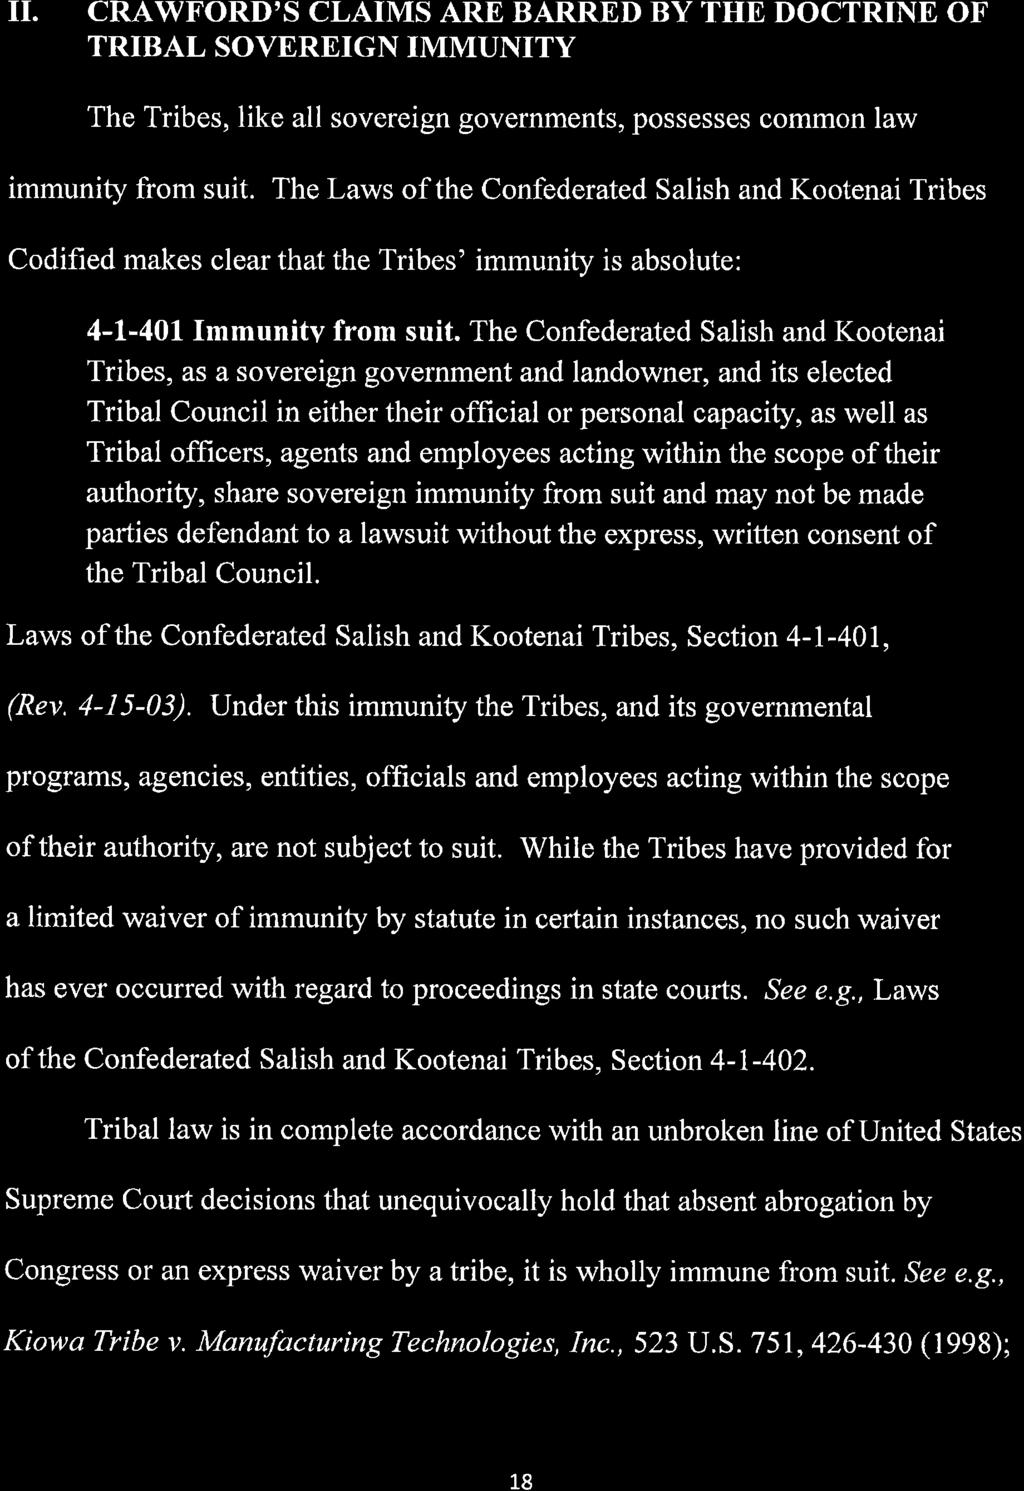 II. CRAWFORD'S CLAIMS ARE BARRED BY THE DOCTRINE OF TRIBAL SOVEREIGN IMMUNITY The Tribes, like all sovereign governments, possesses common law immunity from suit.